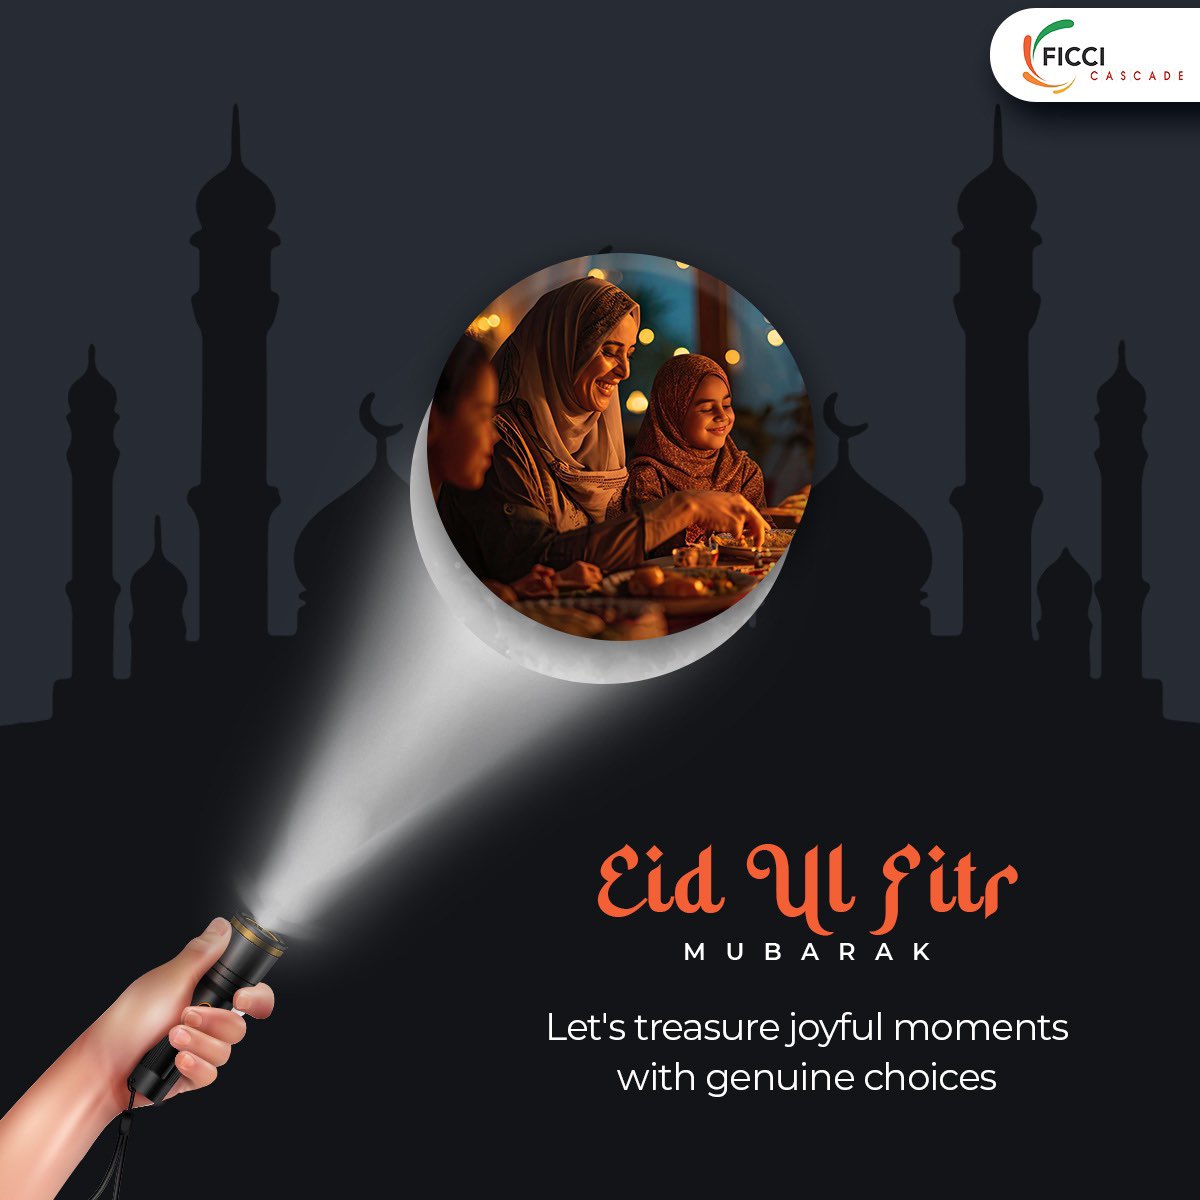 Eid Mubarak! Just like we cherish genuine connections, let's also be aware of counterfeit products that tarnish our celebrations. Spread the word to support authentic goods. #EidMubarak #GenuineProducts #SafeCelebration